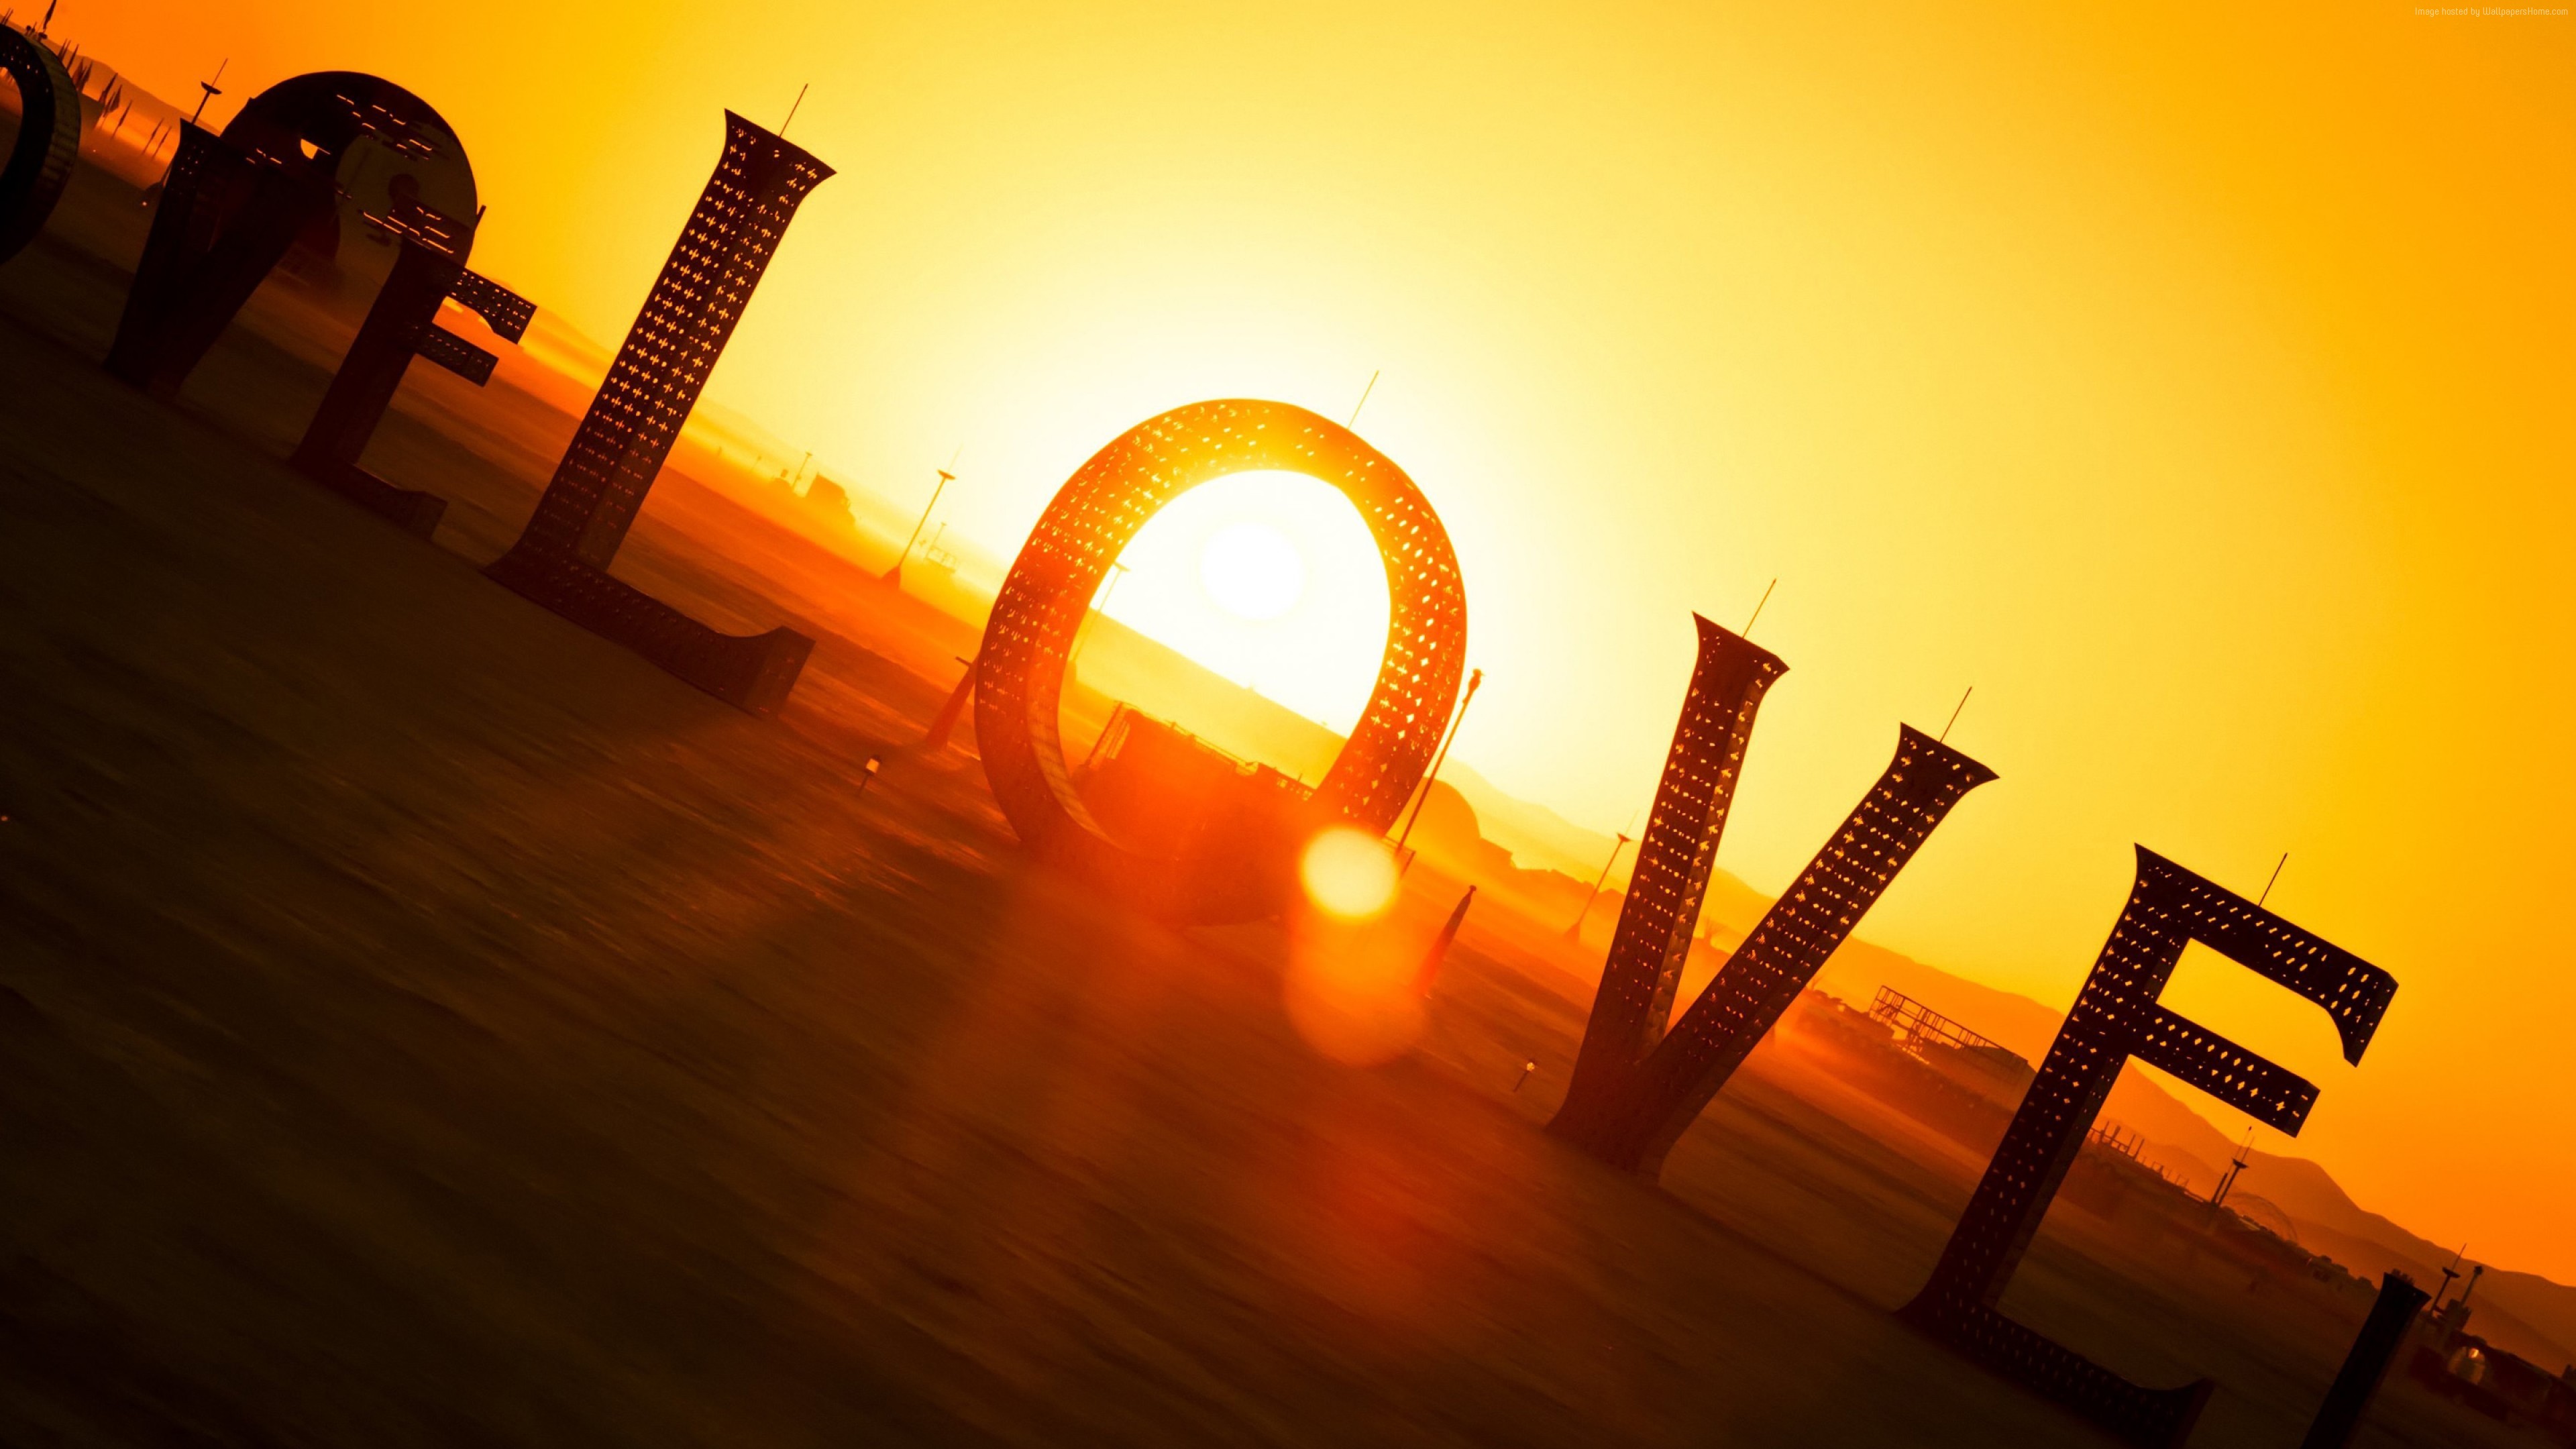 Stock Images love image, heart, HD, Stock Images